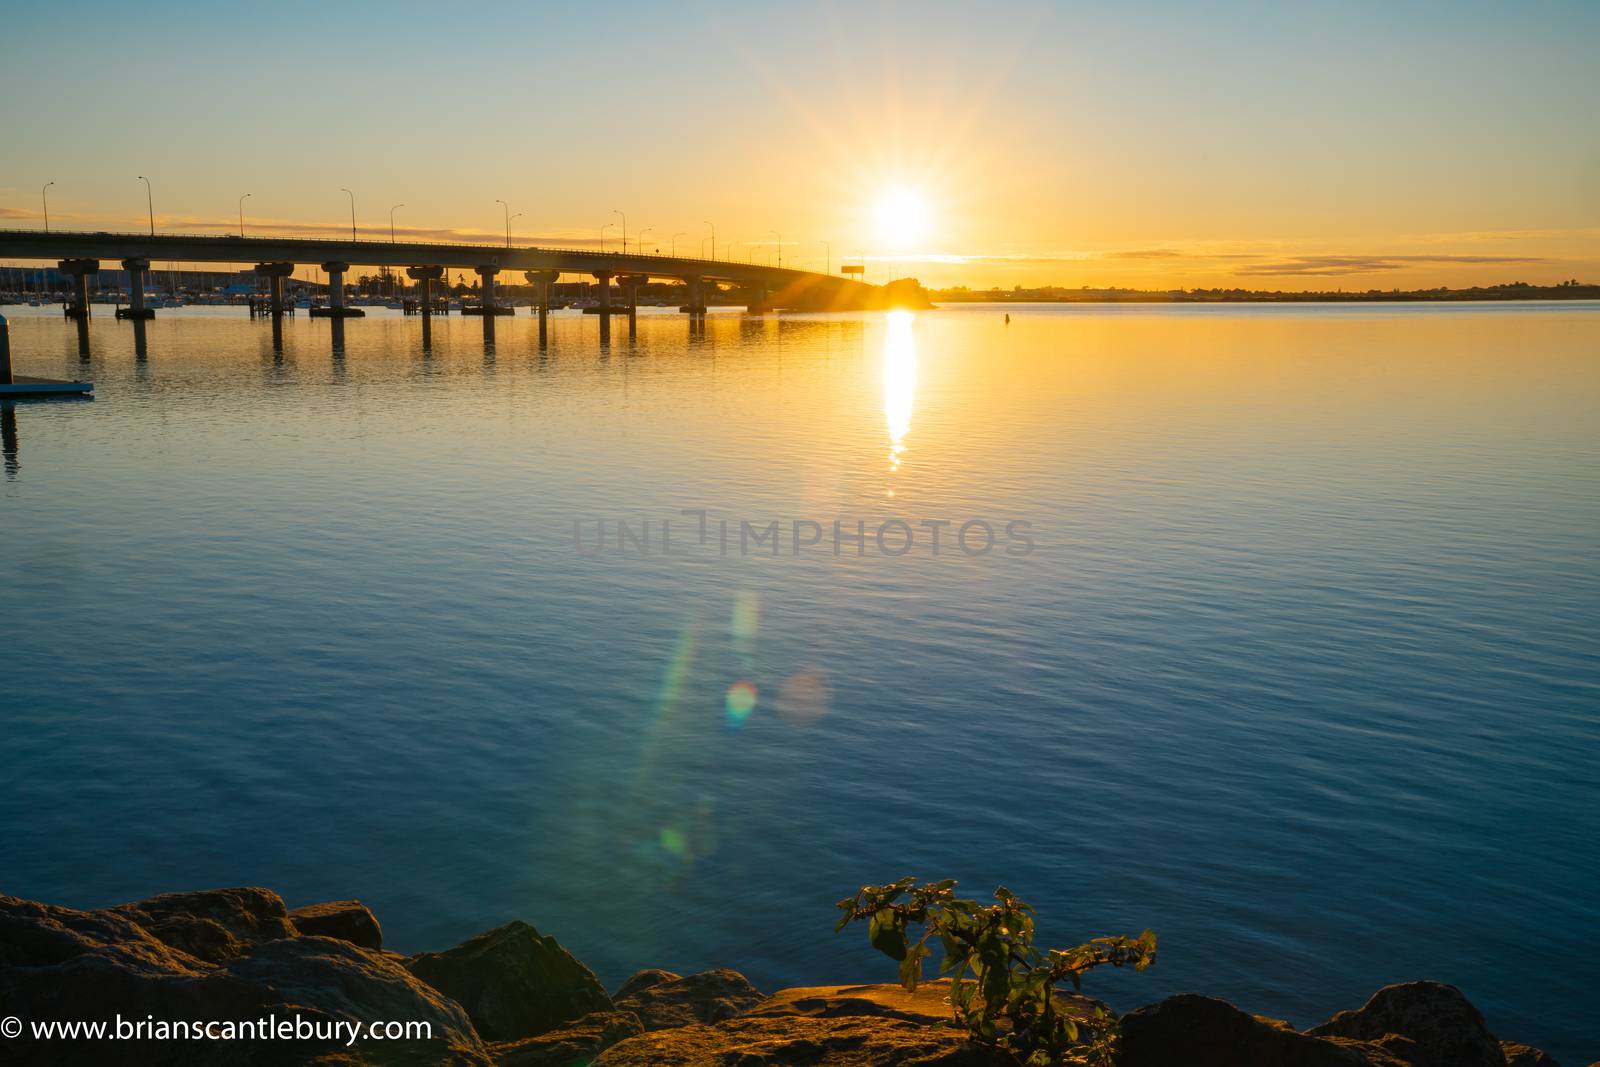 Sweeping lines of Tauranga Harbour Bridge over calm blue water with glow of rising sun at far end over horizon.